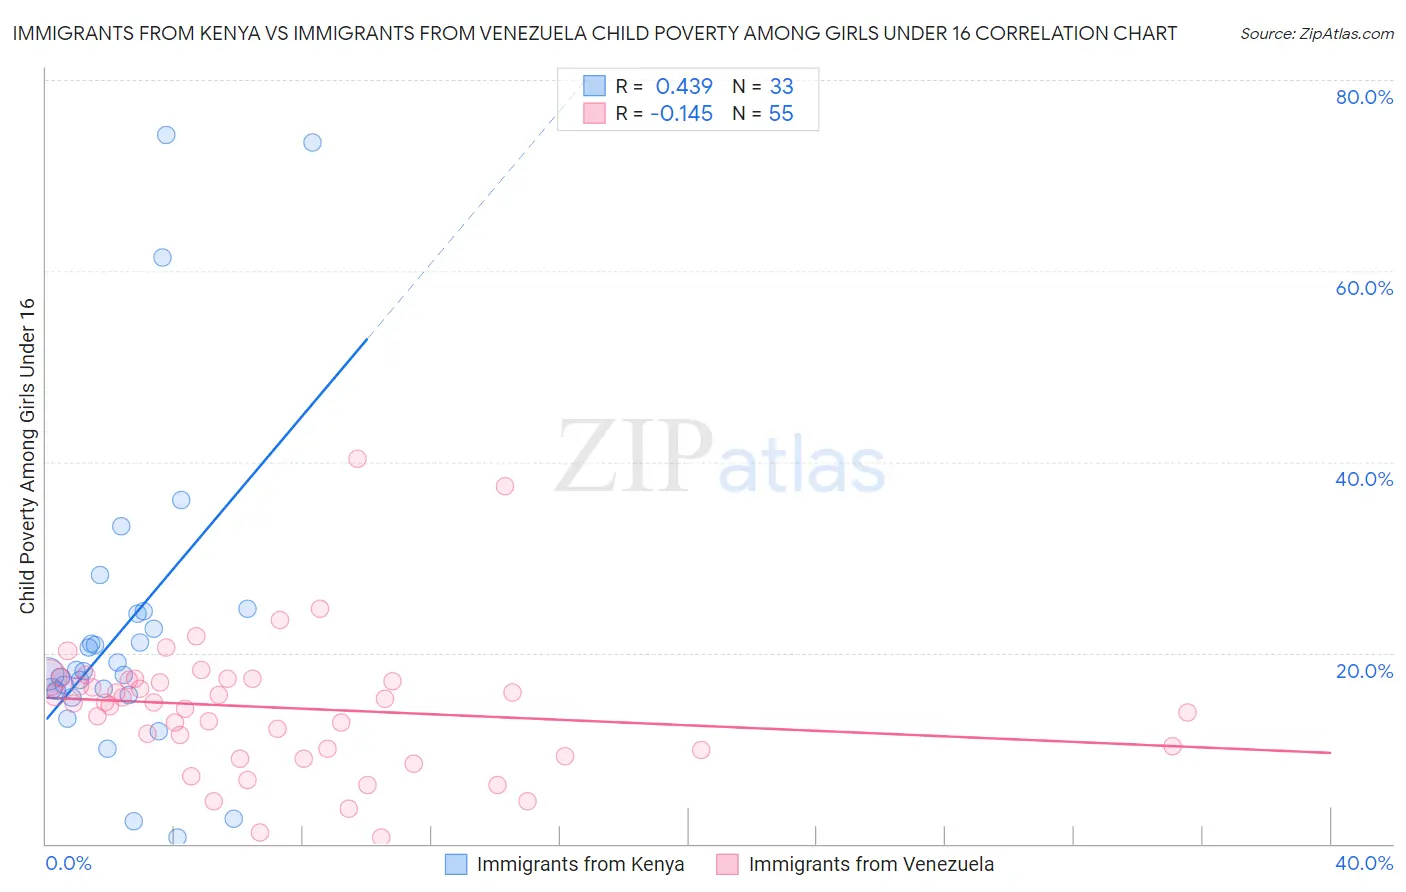 Immigrants from Kenya vs Immigrants from Venezuela Child Poverty Among Girls Under 16